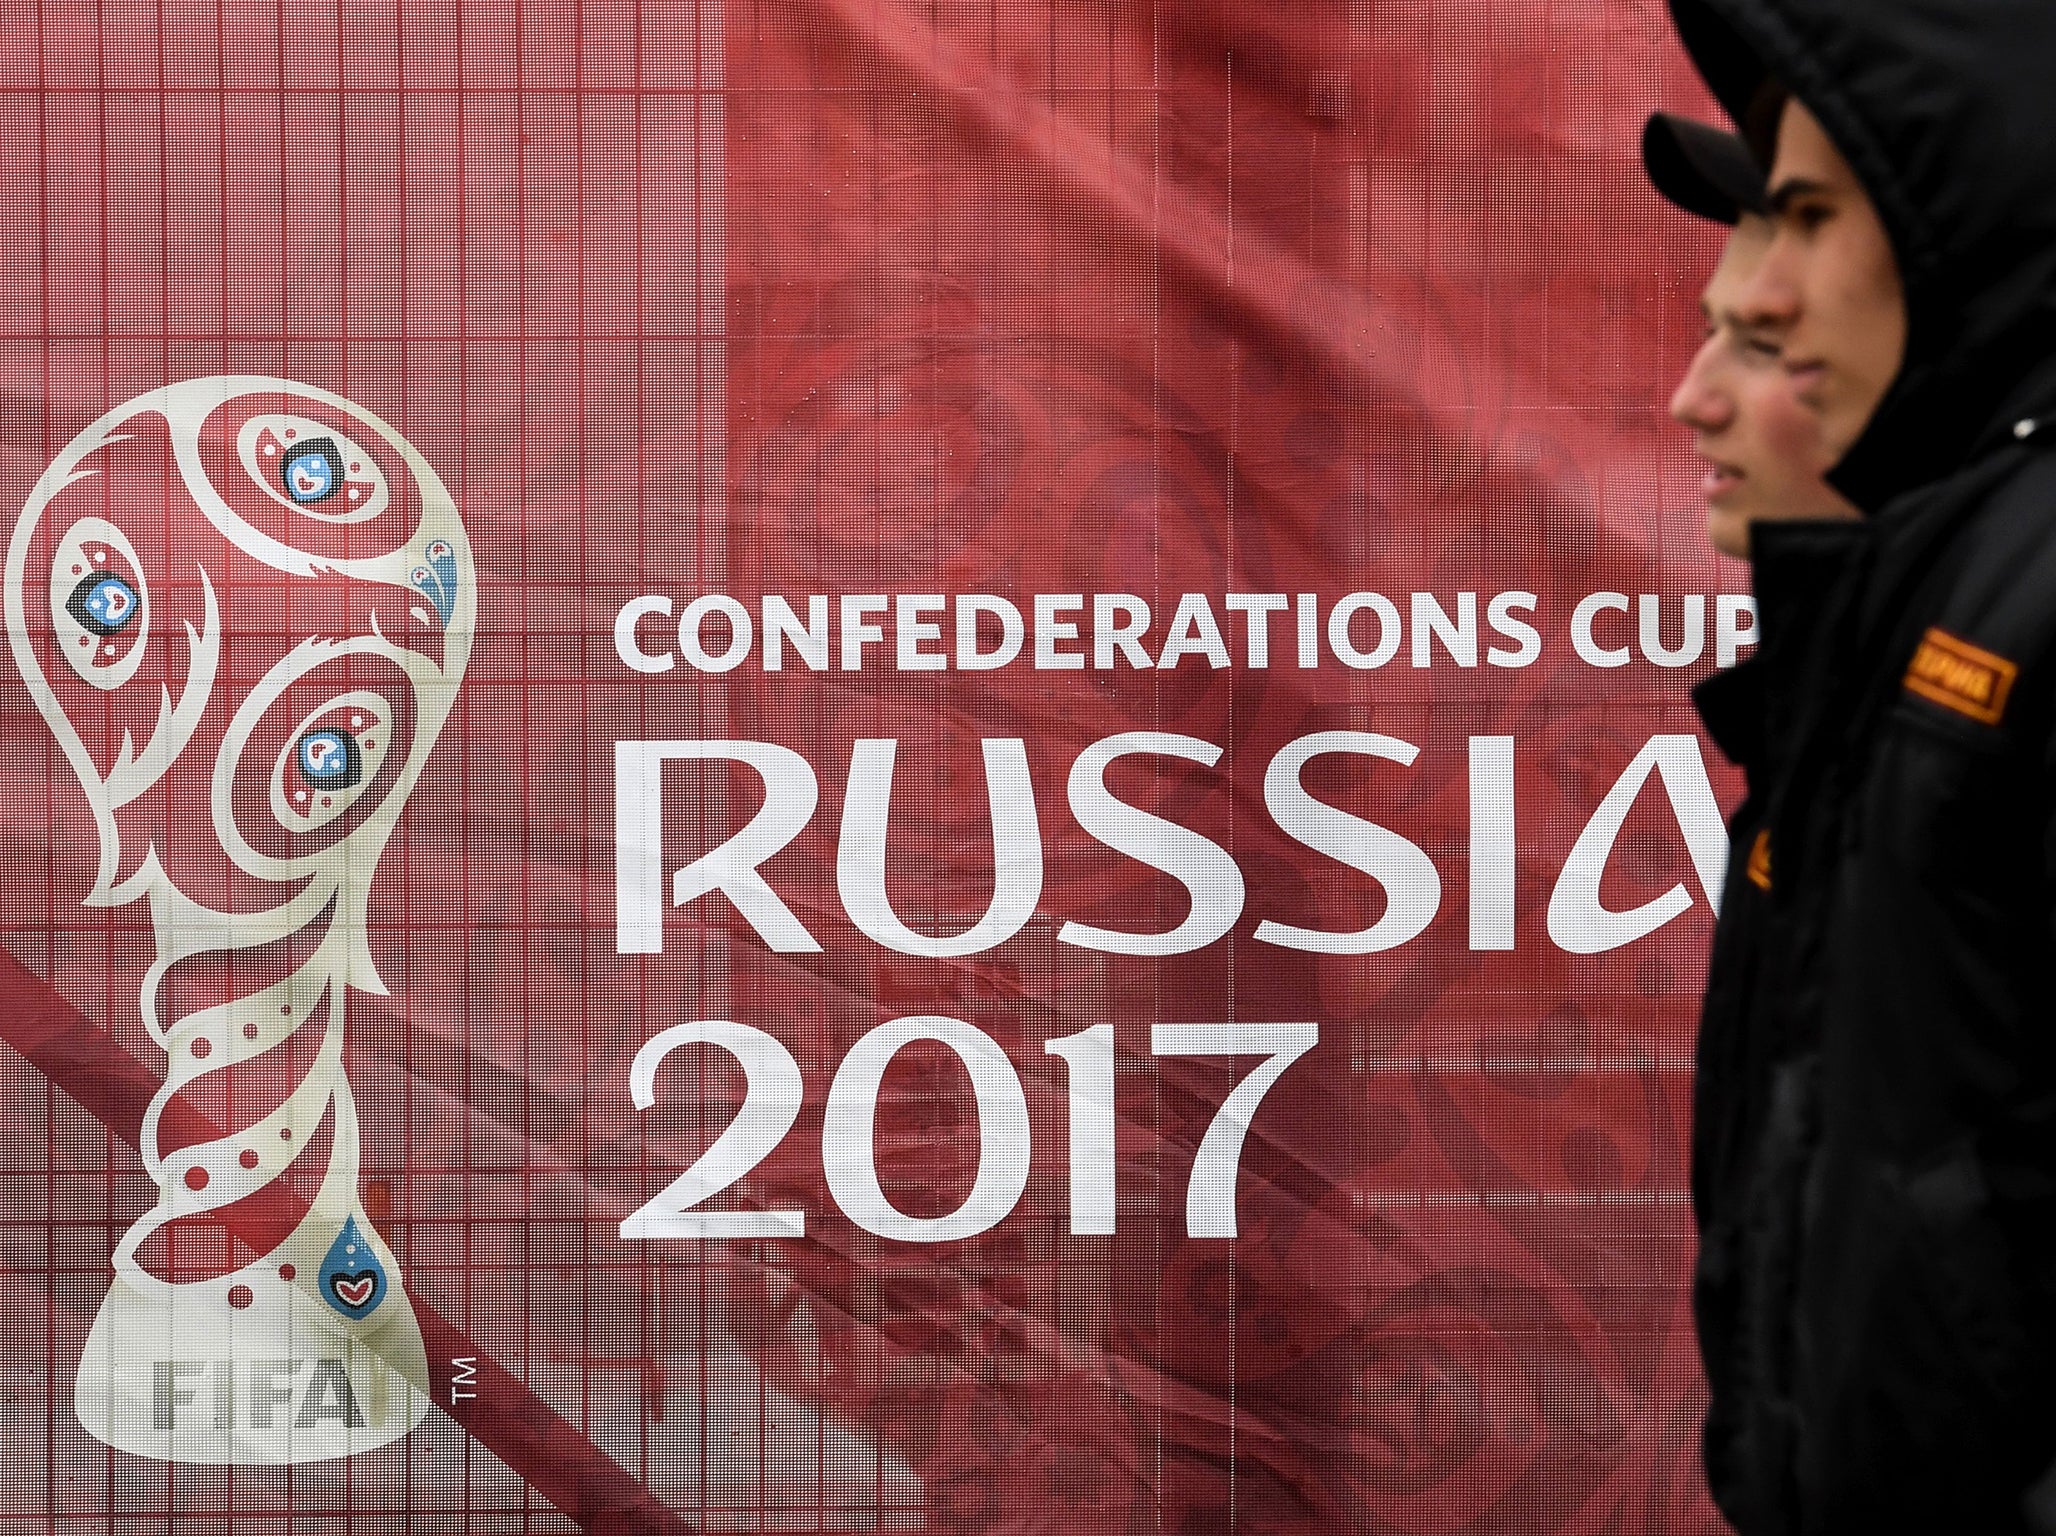 The Confederations Cup passed by peacefully enough